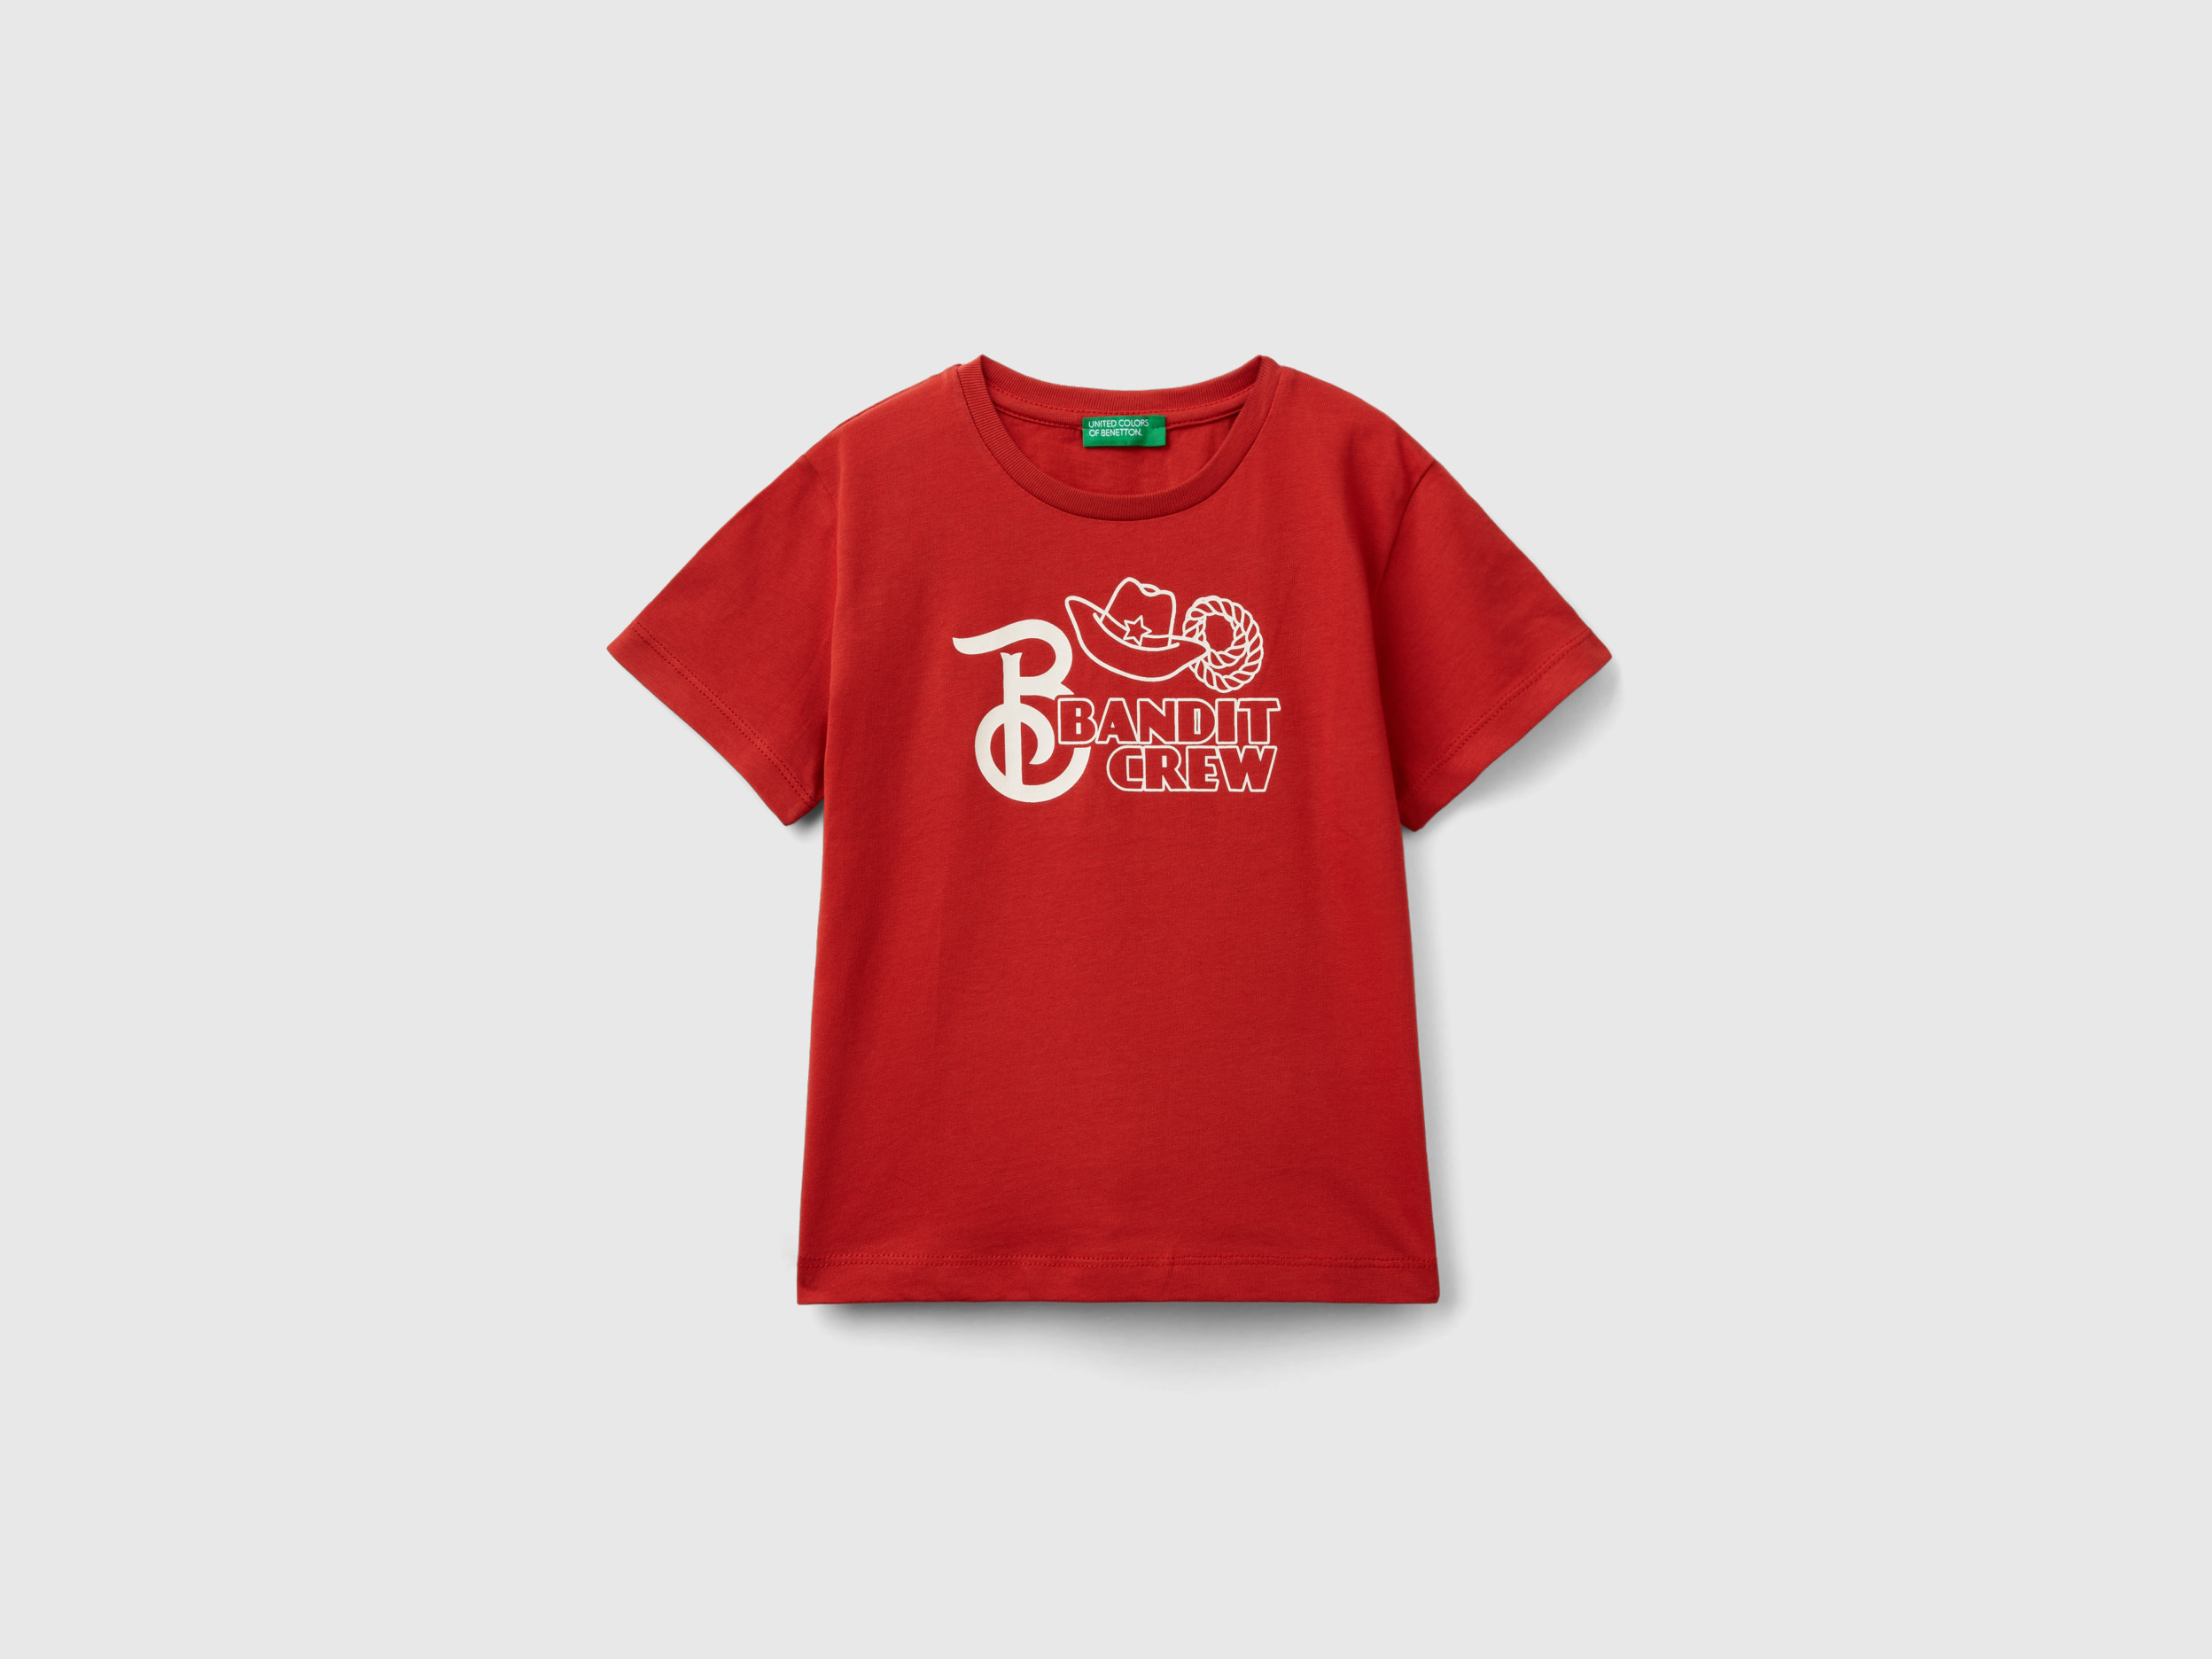 Benetton, T-shirt In Organic Cotton With Print, size 3-4, Red, Kids